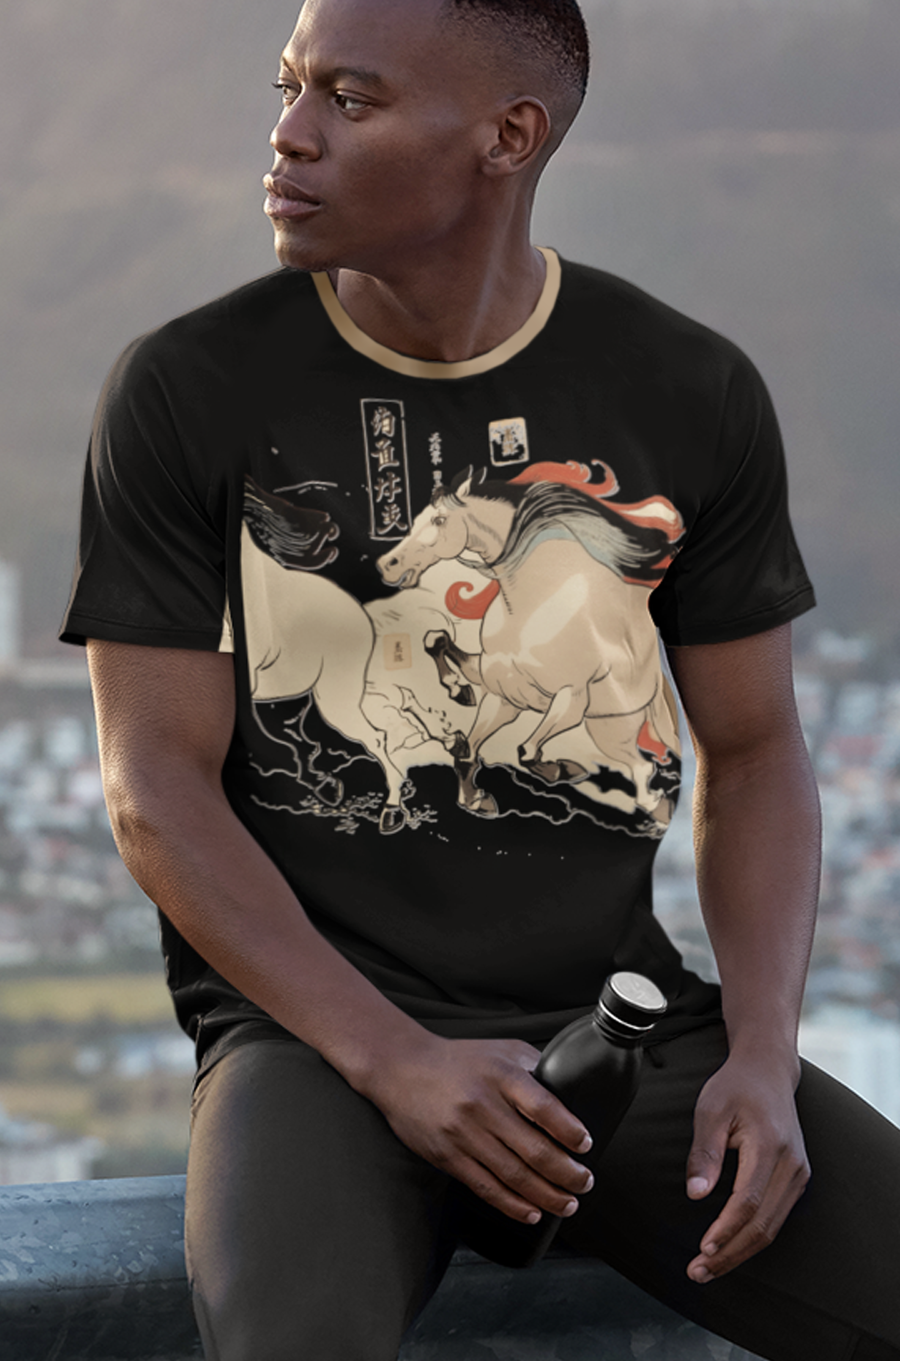 Cool guy wearing an all over print t-shirt of galloping chinese horses design